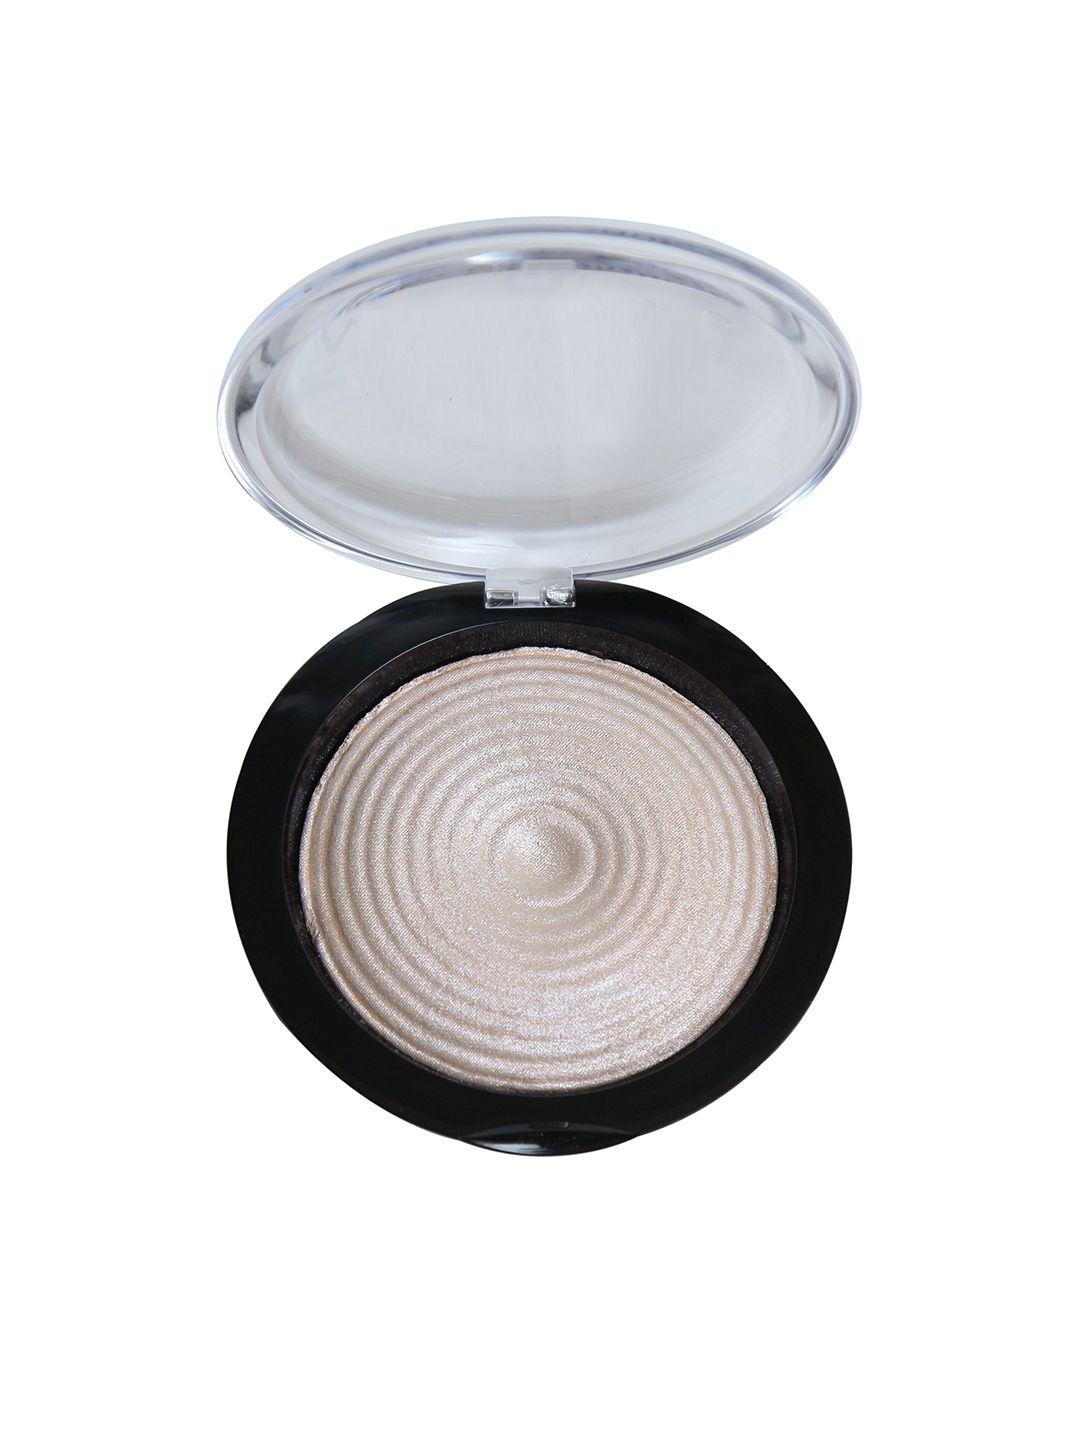 miss claire 04 baked highlighter 8 g